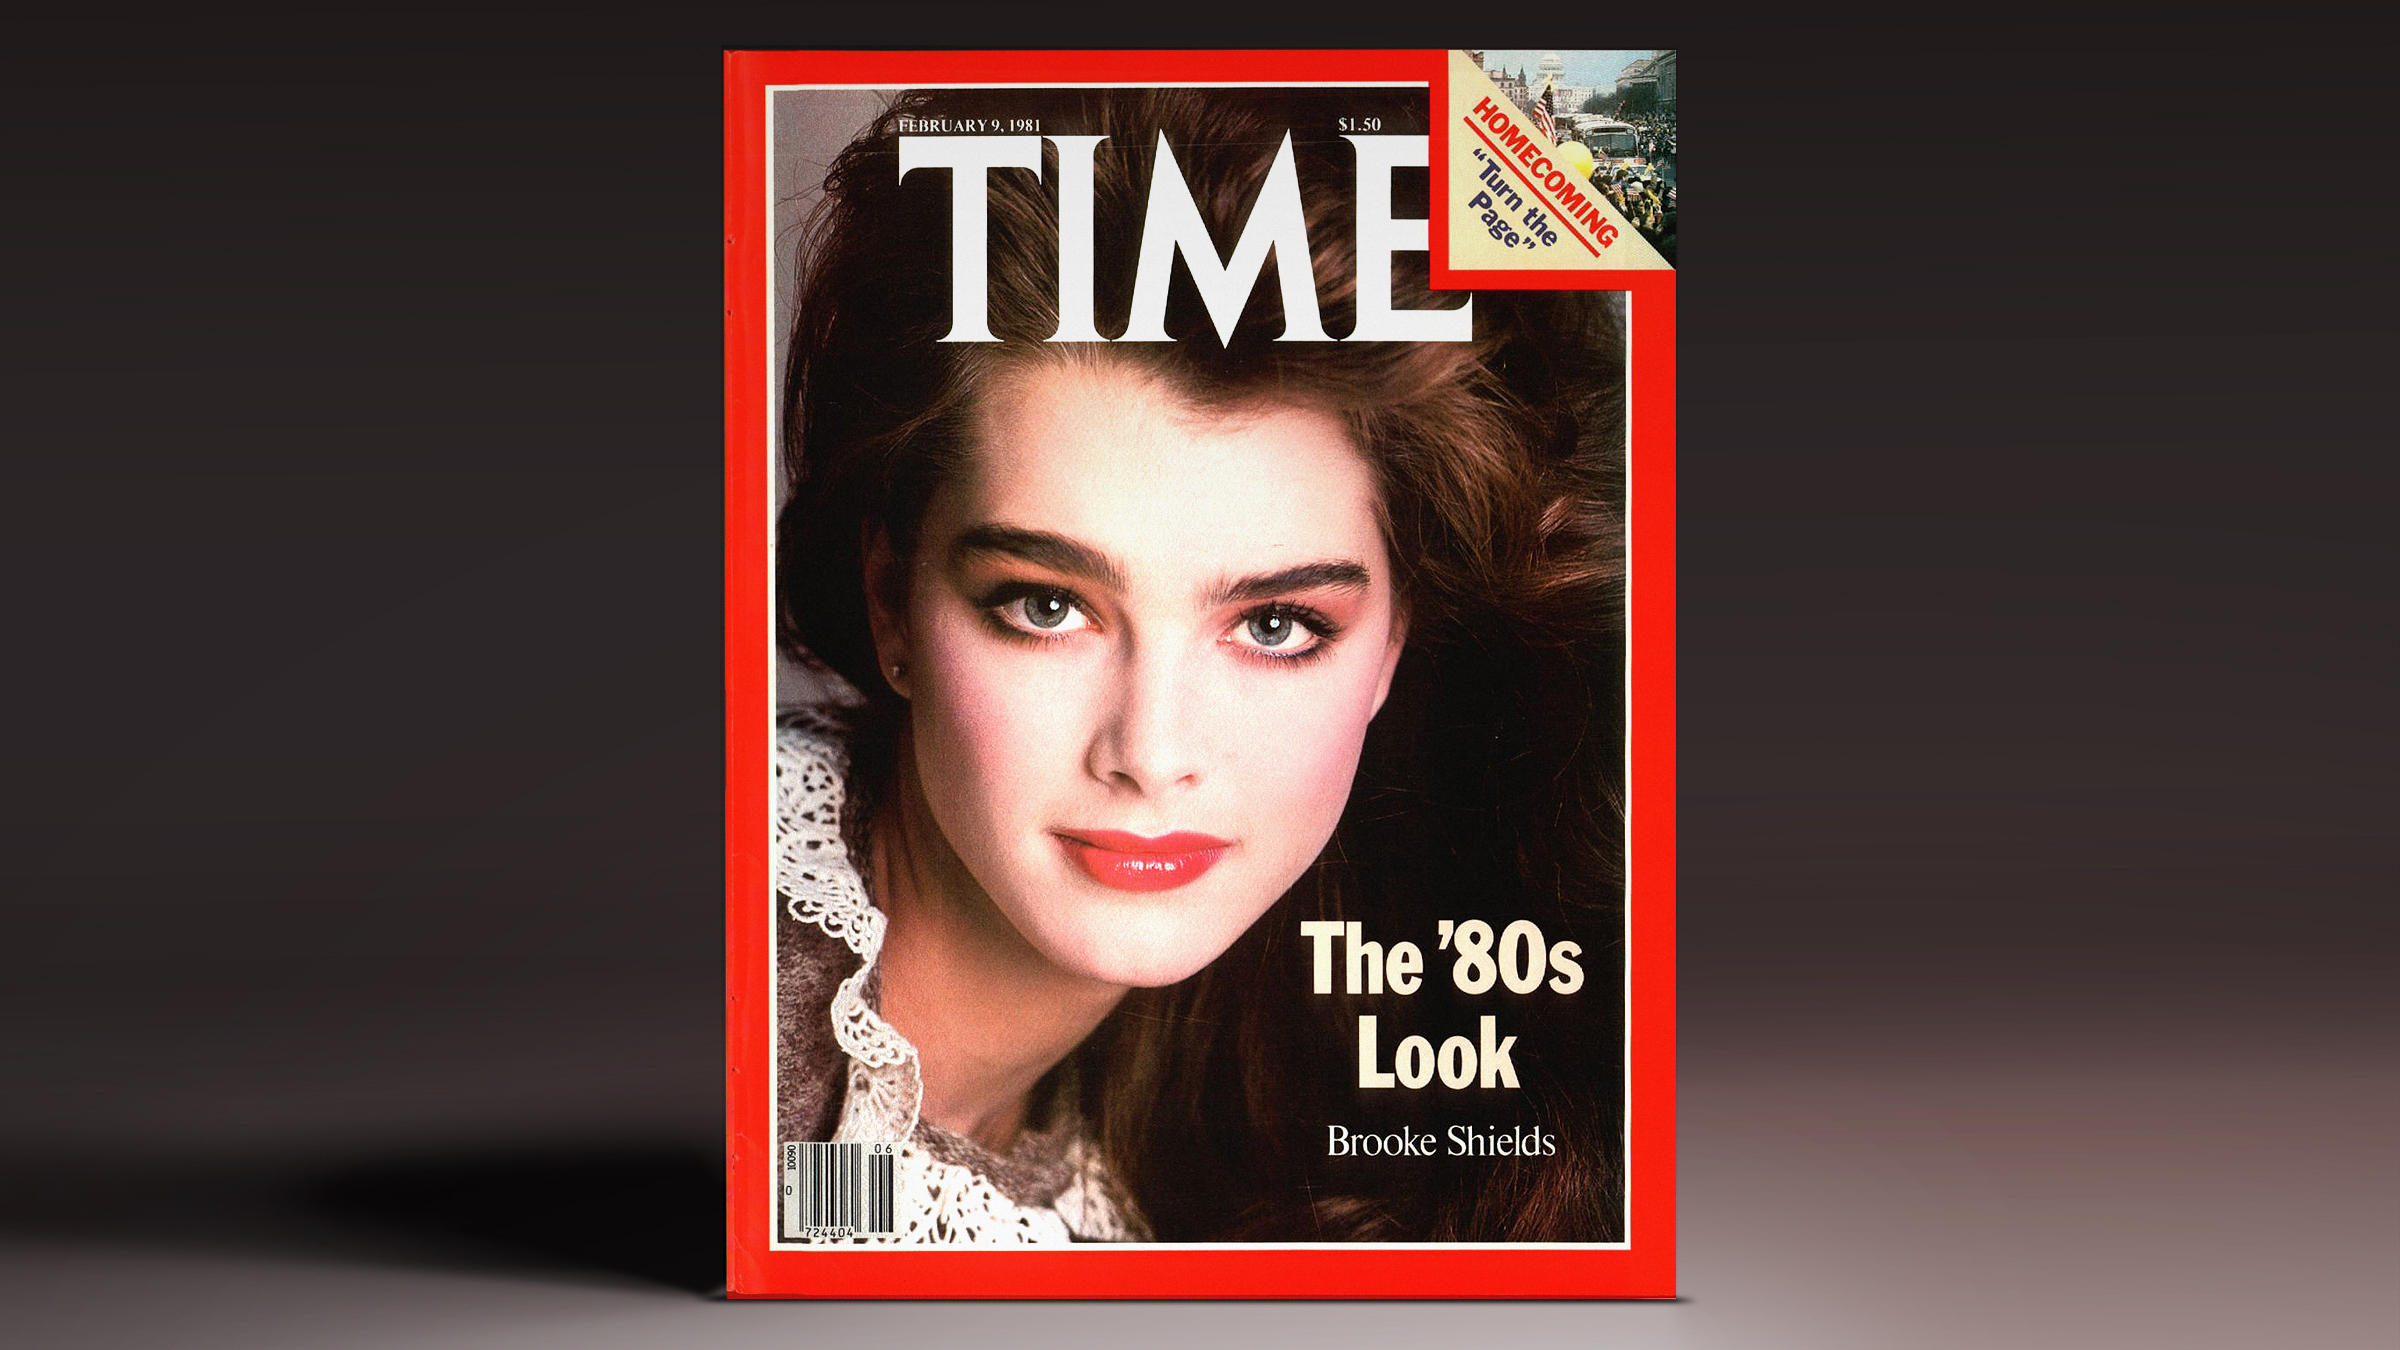 Brooke Shields on the Feb. 9, 1981, cover of TIME